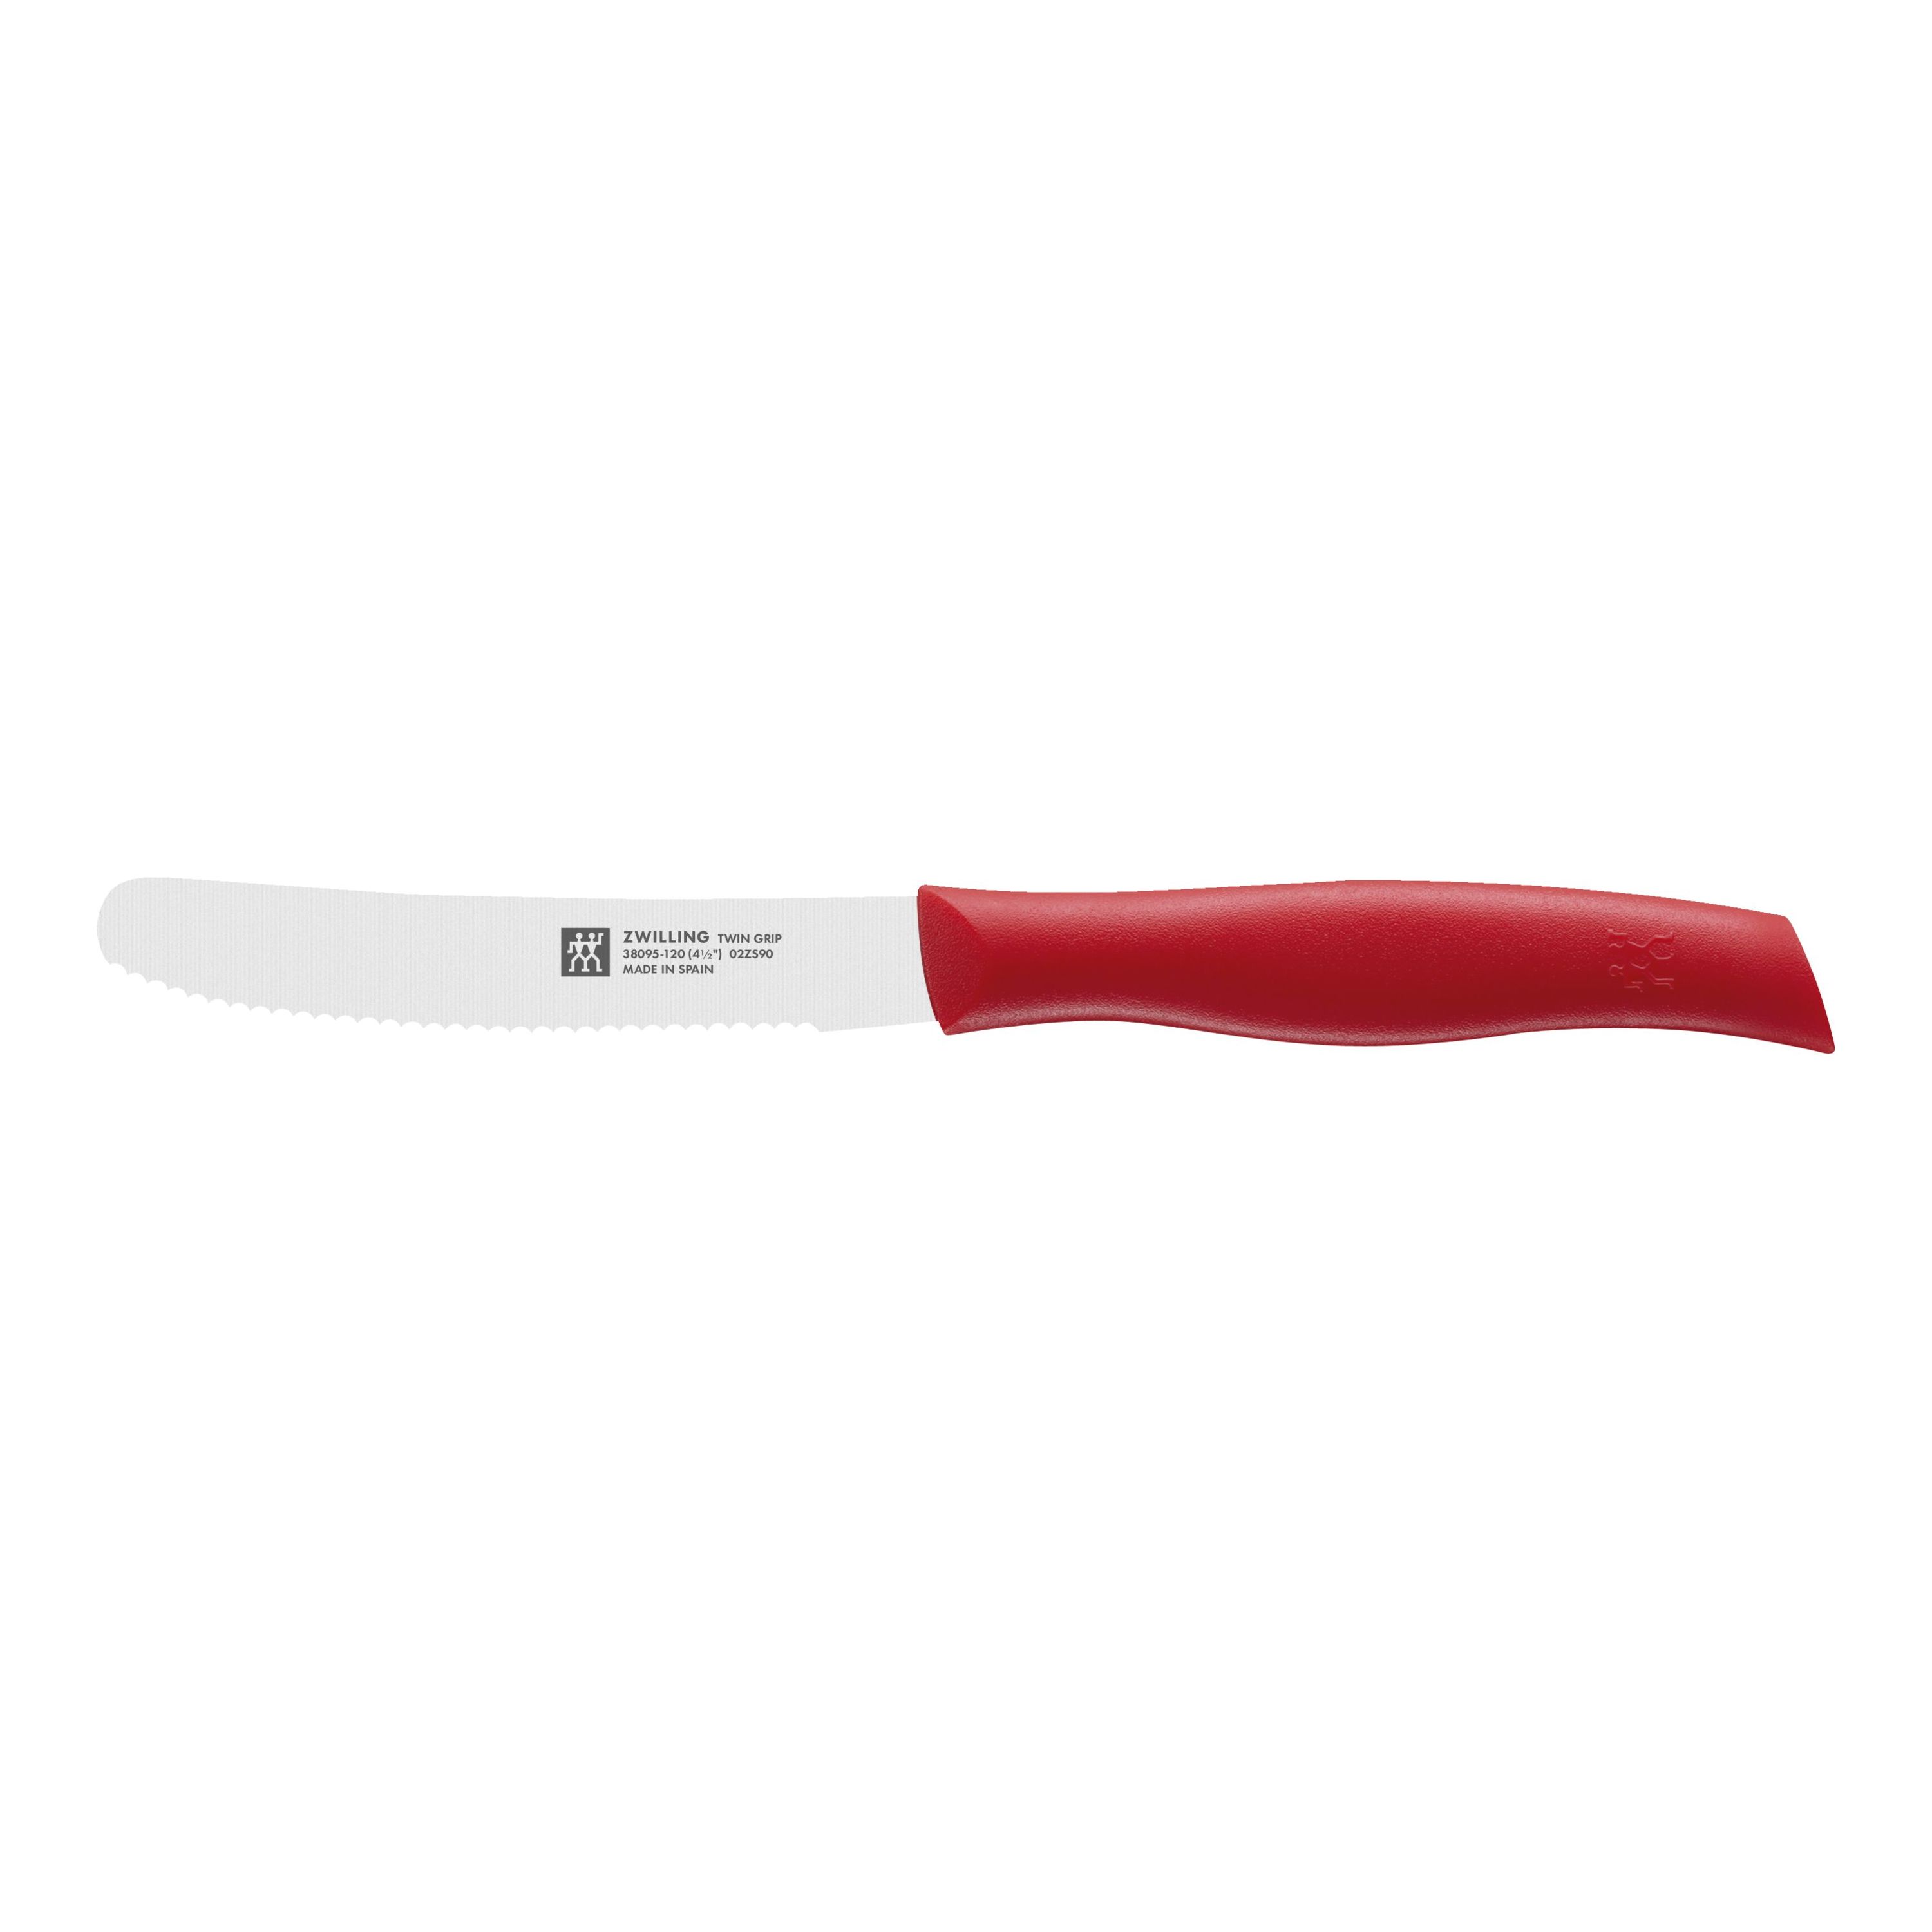 https://www.zwilling.com/on/demandware.static/-/Sites-zwilling-master-catalog/default/dw6a7b9c1b/images/large/38095-121-0_1_NEW.jpg